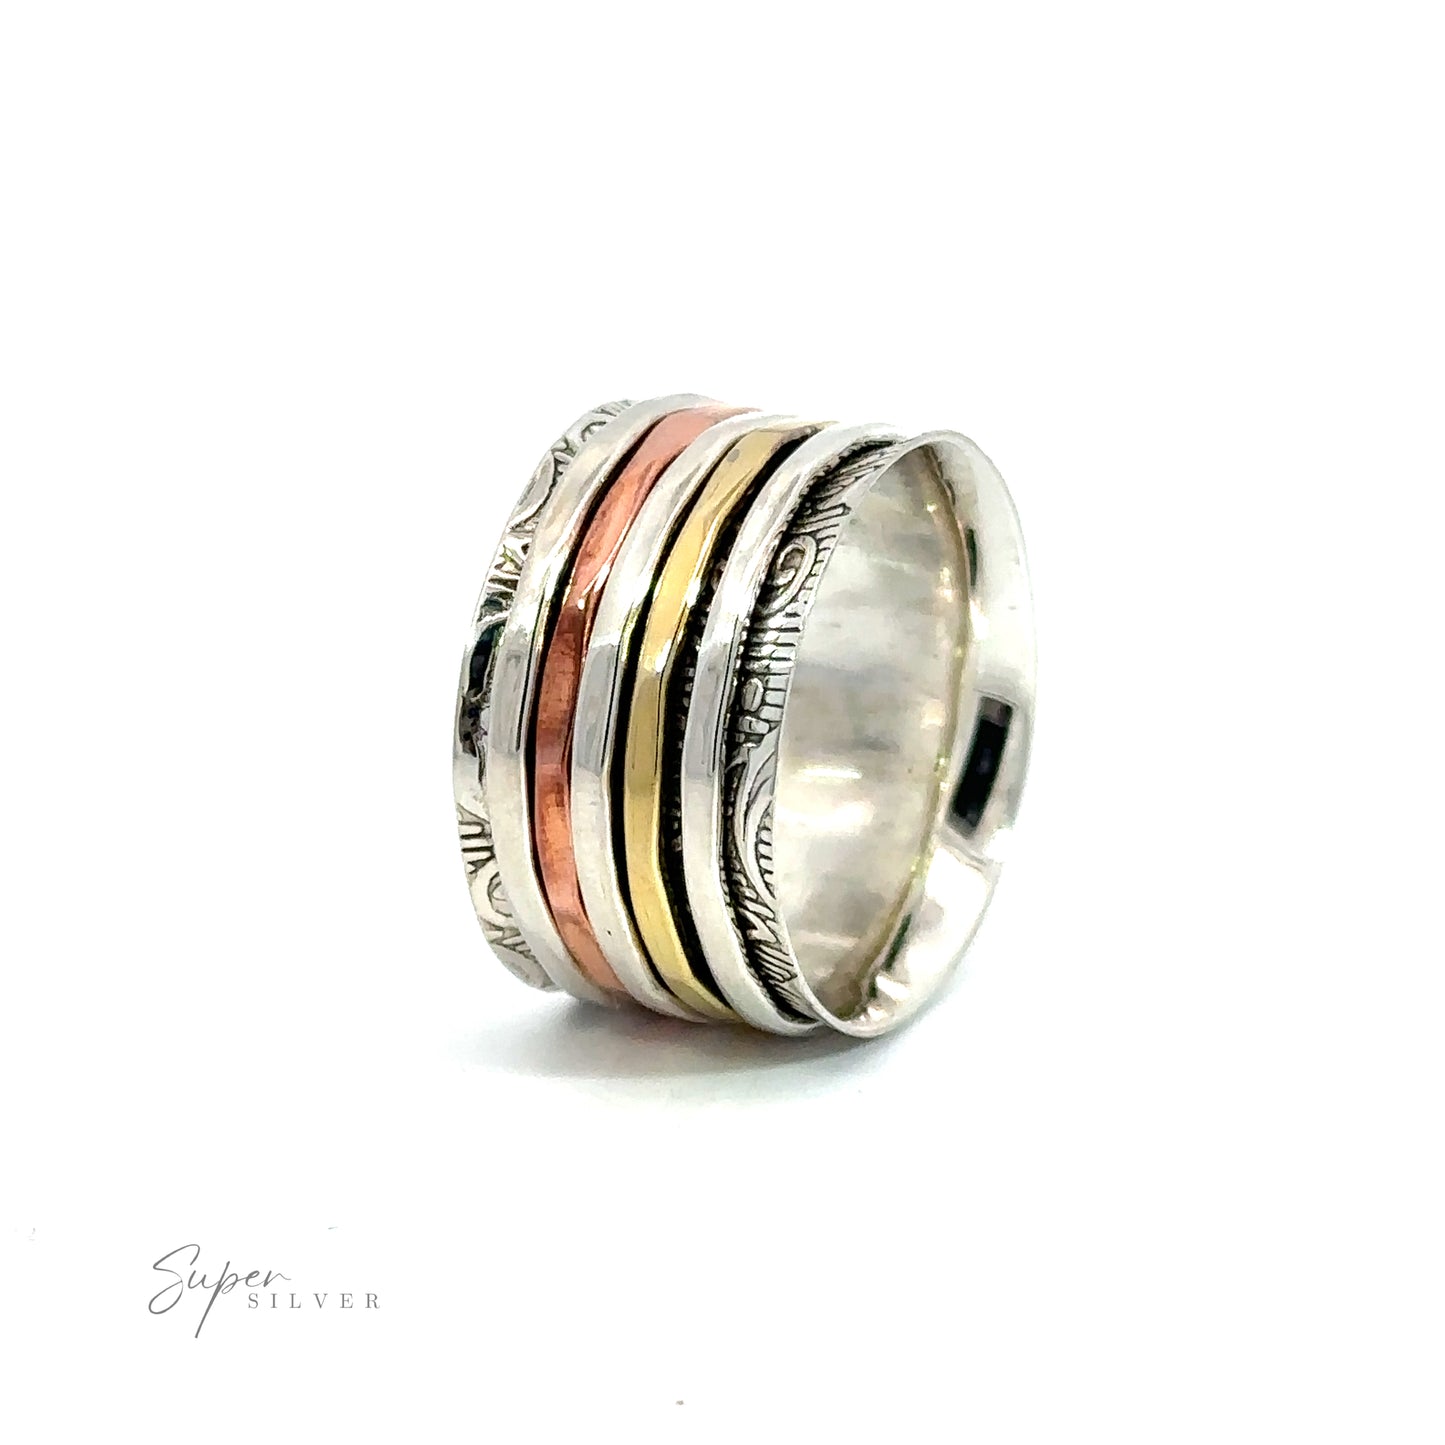 A silver and gold Handmade Tricolor Etched Spinner Ring with three different colors.